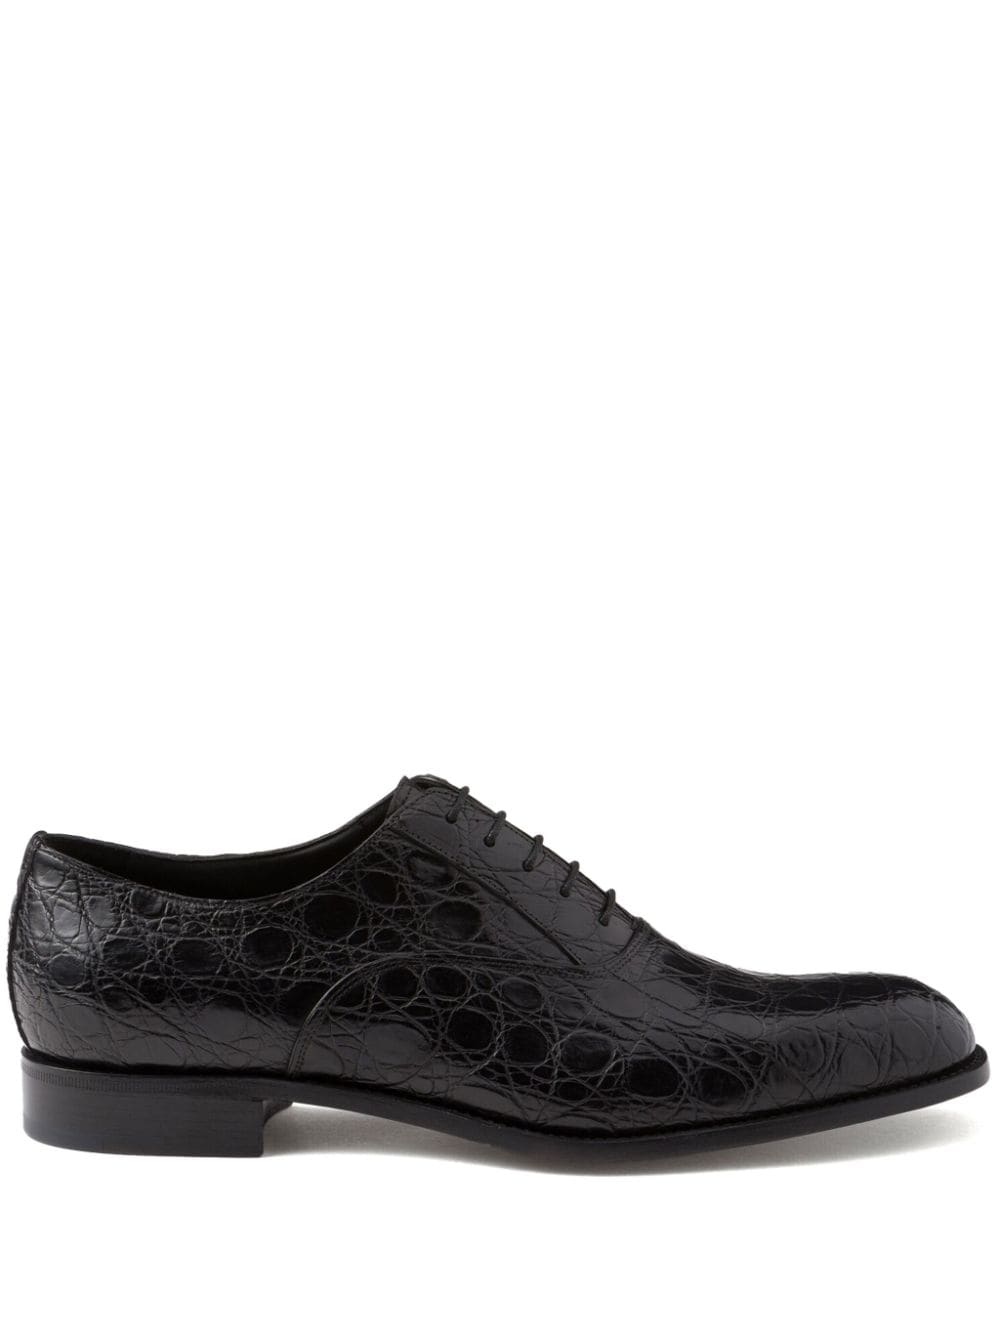 crocodile-effect leather Oxford shoes